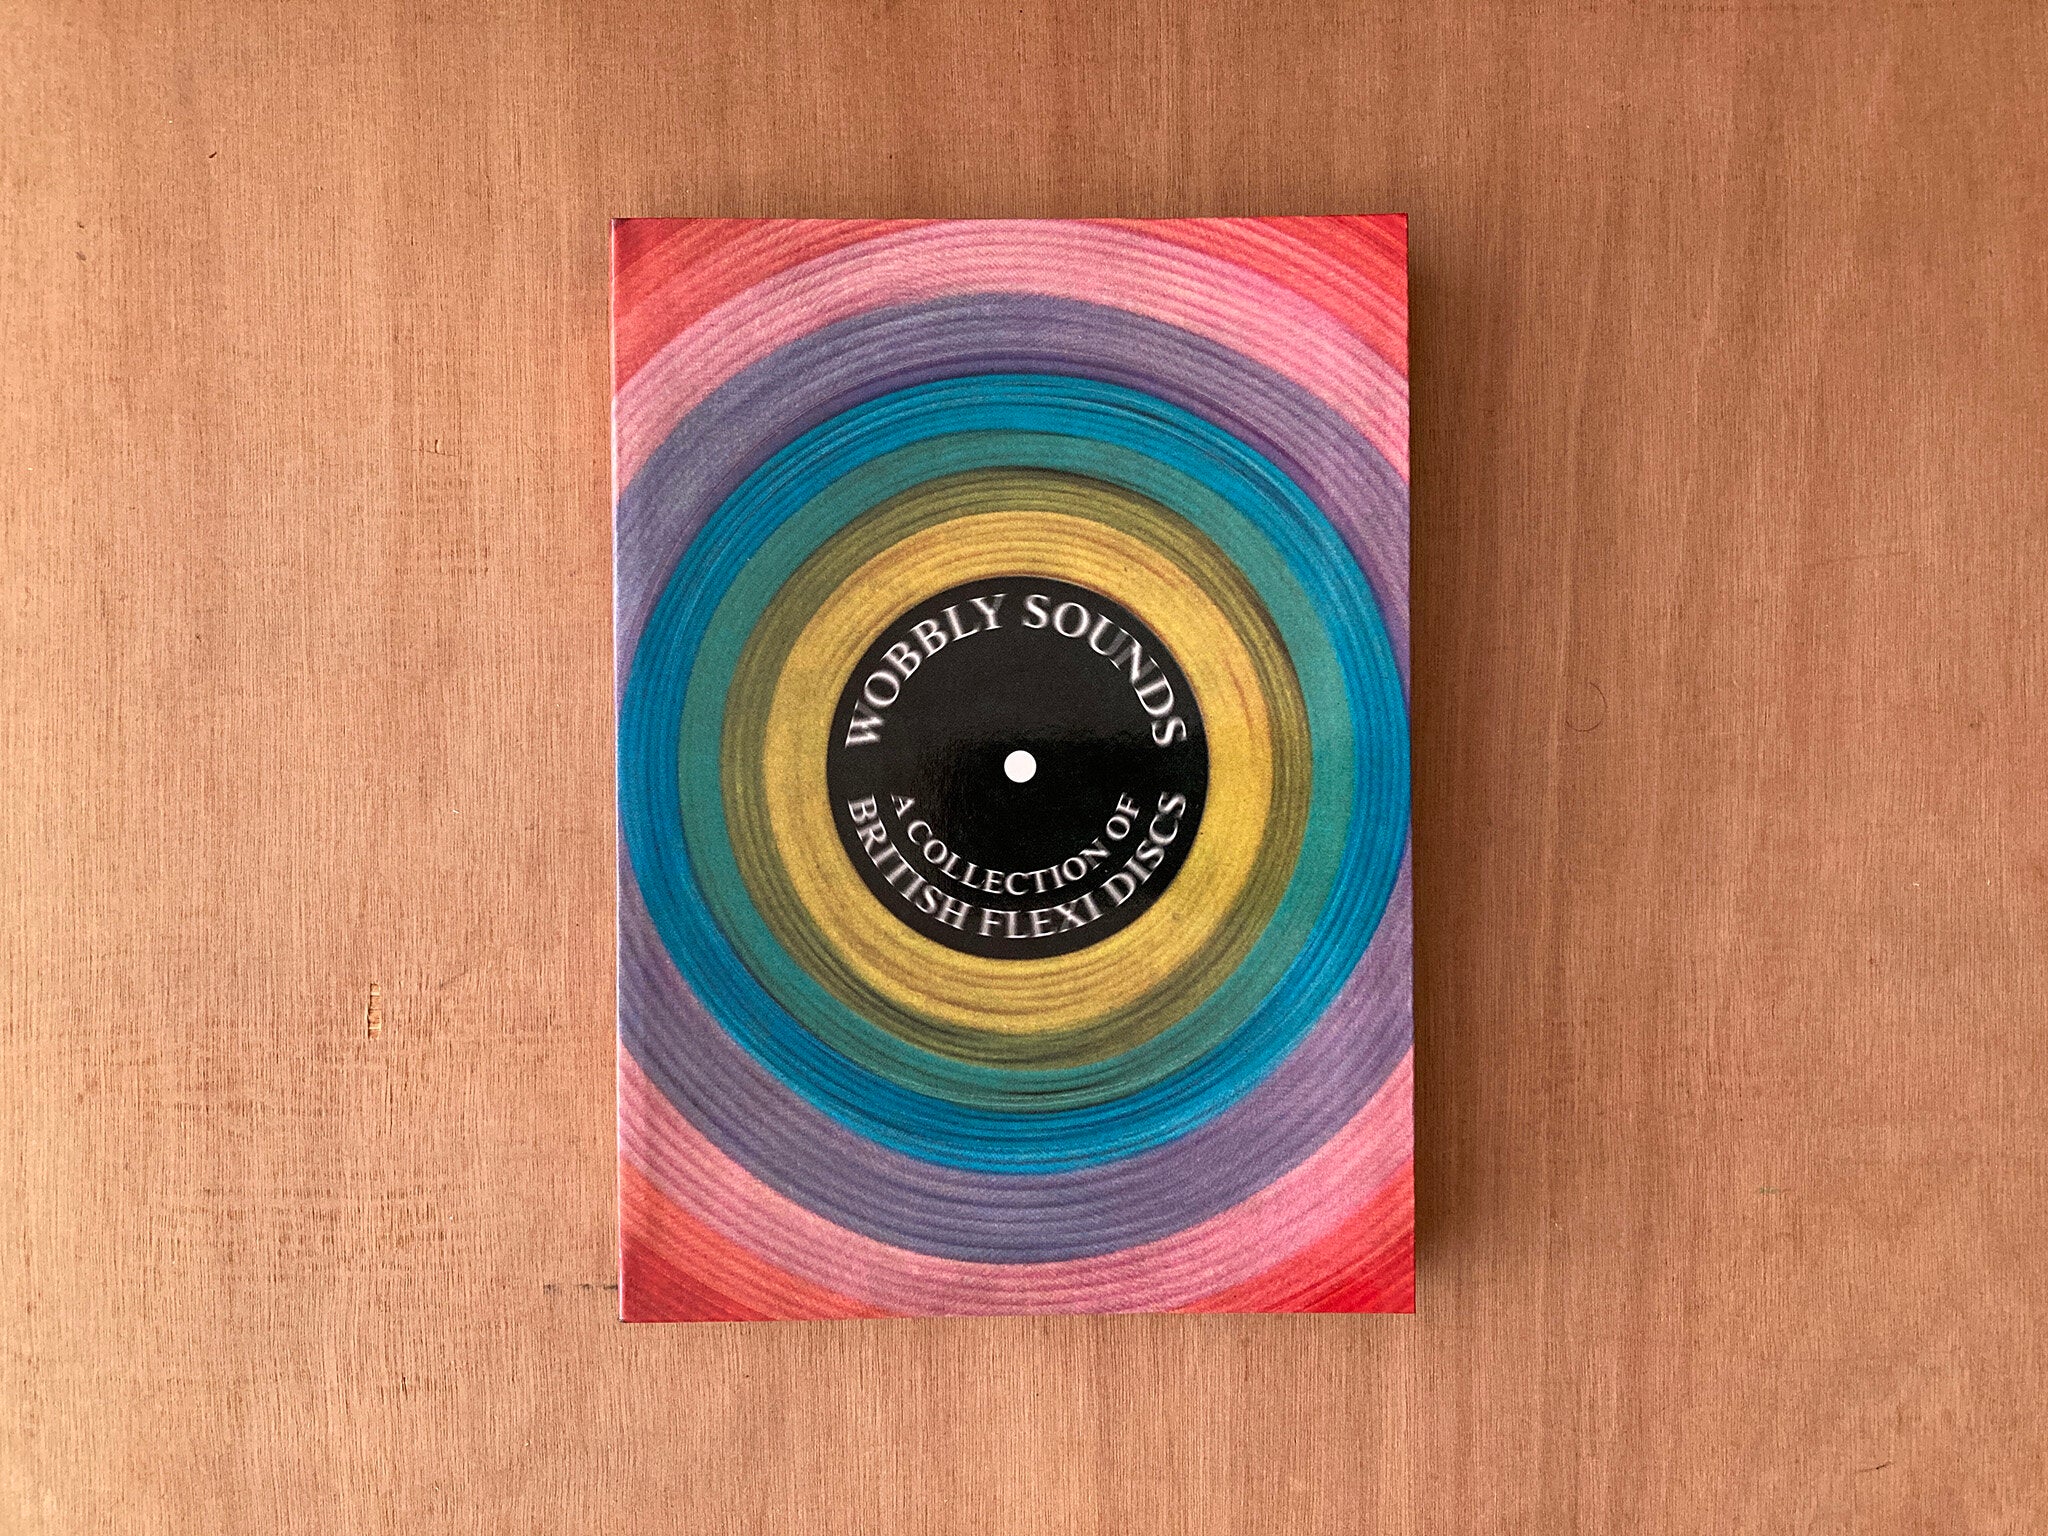 WOBBLY SOUNDS, A COLLECTION OF BRITISH FLEXI DISCS by Jonny Trunk